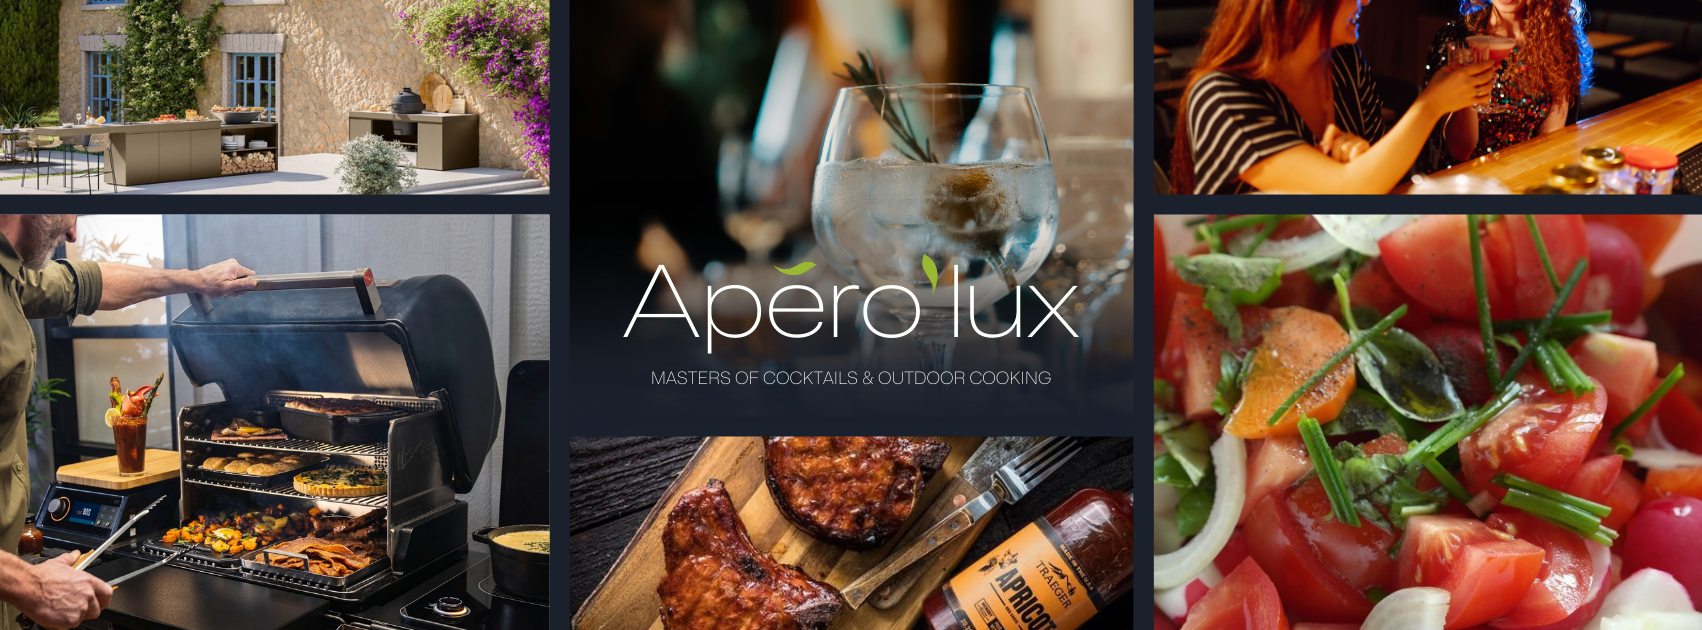 aperolux-banner.png